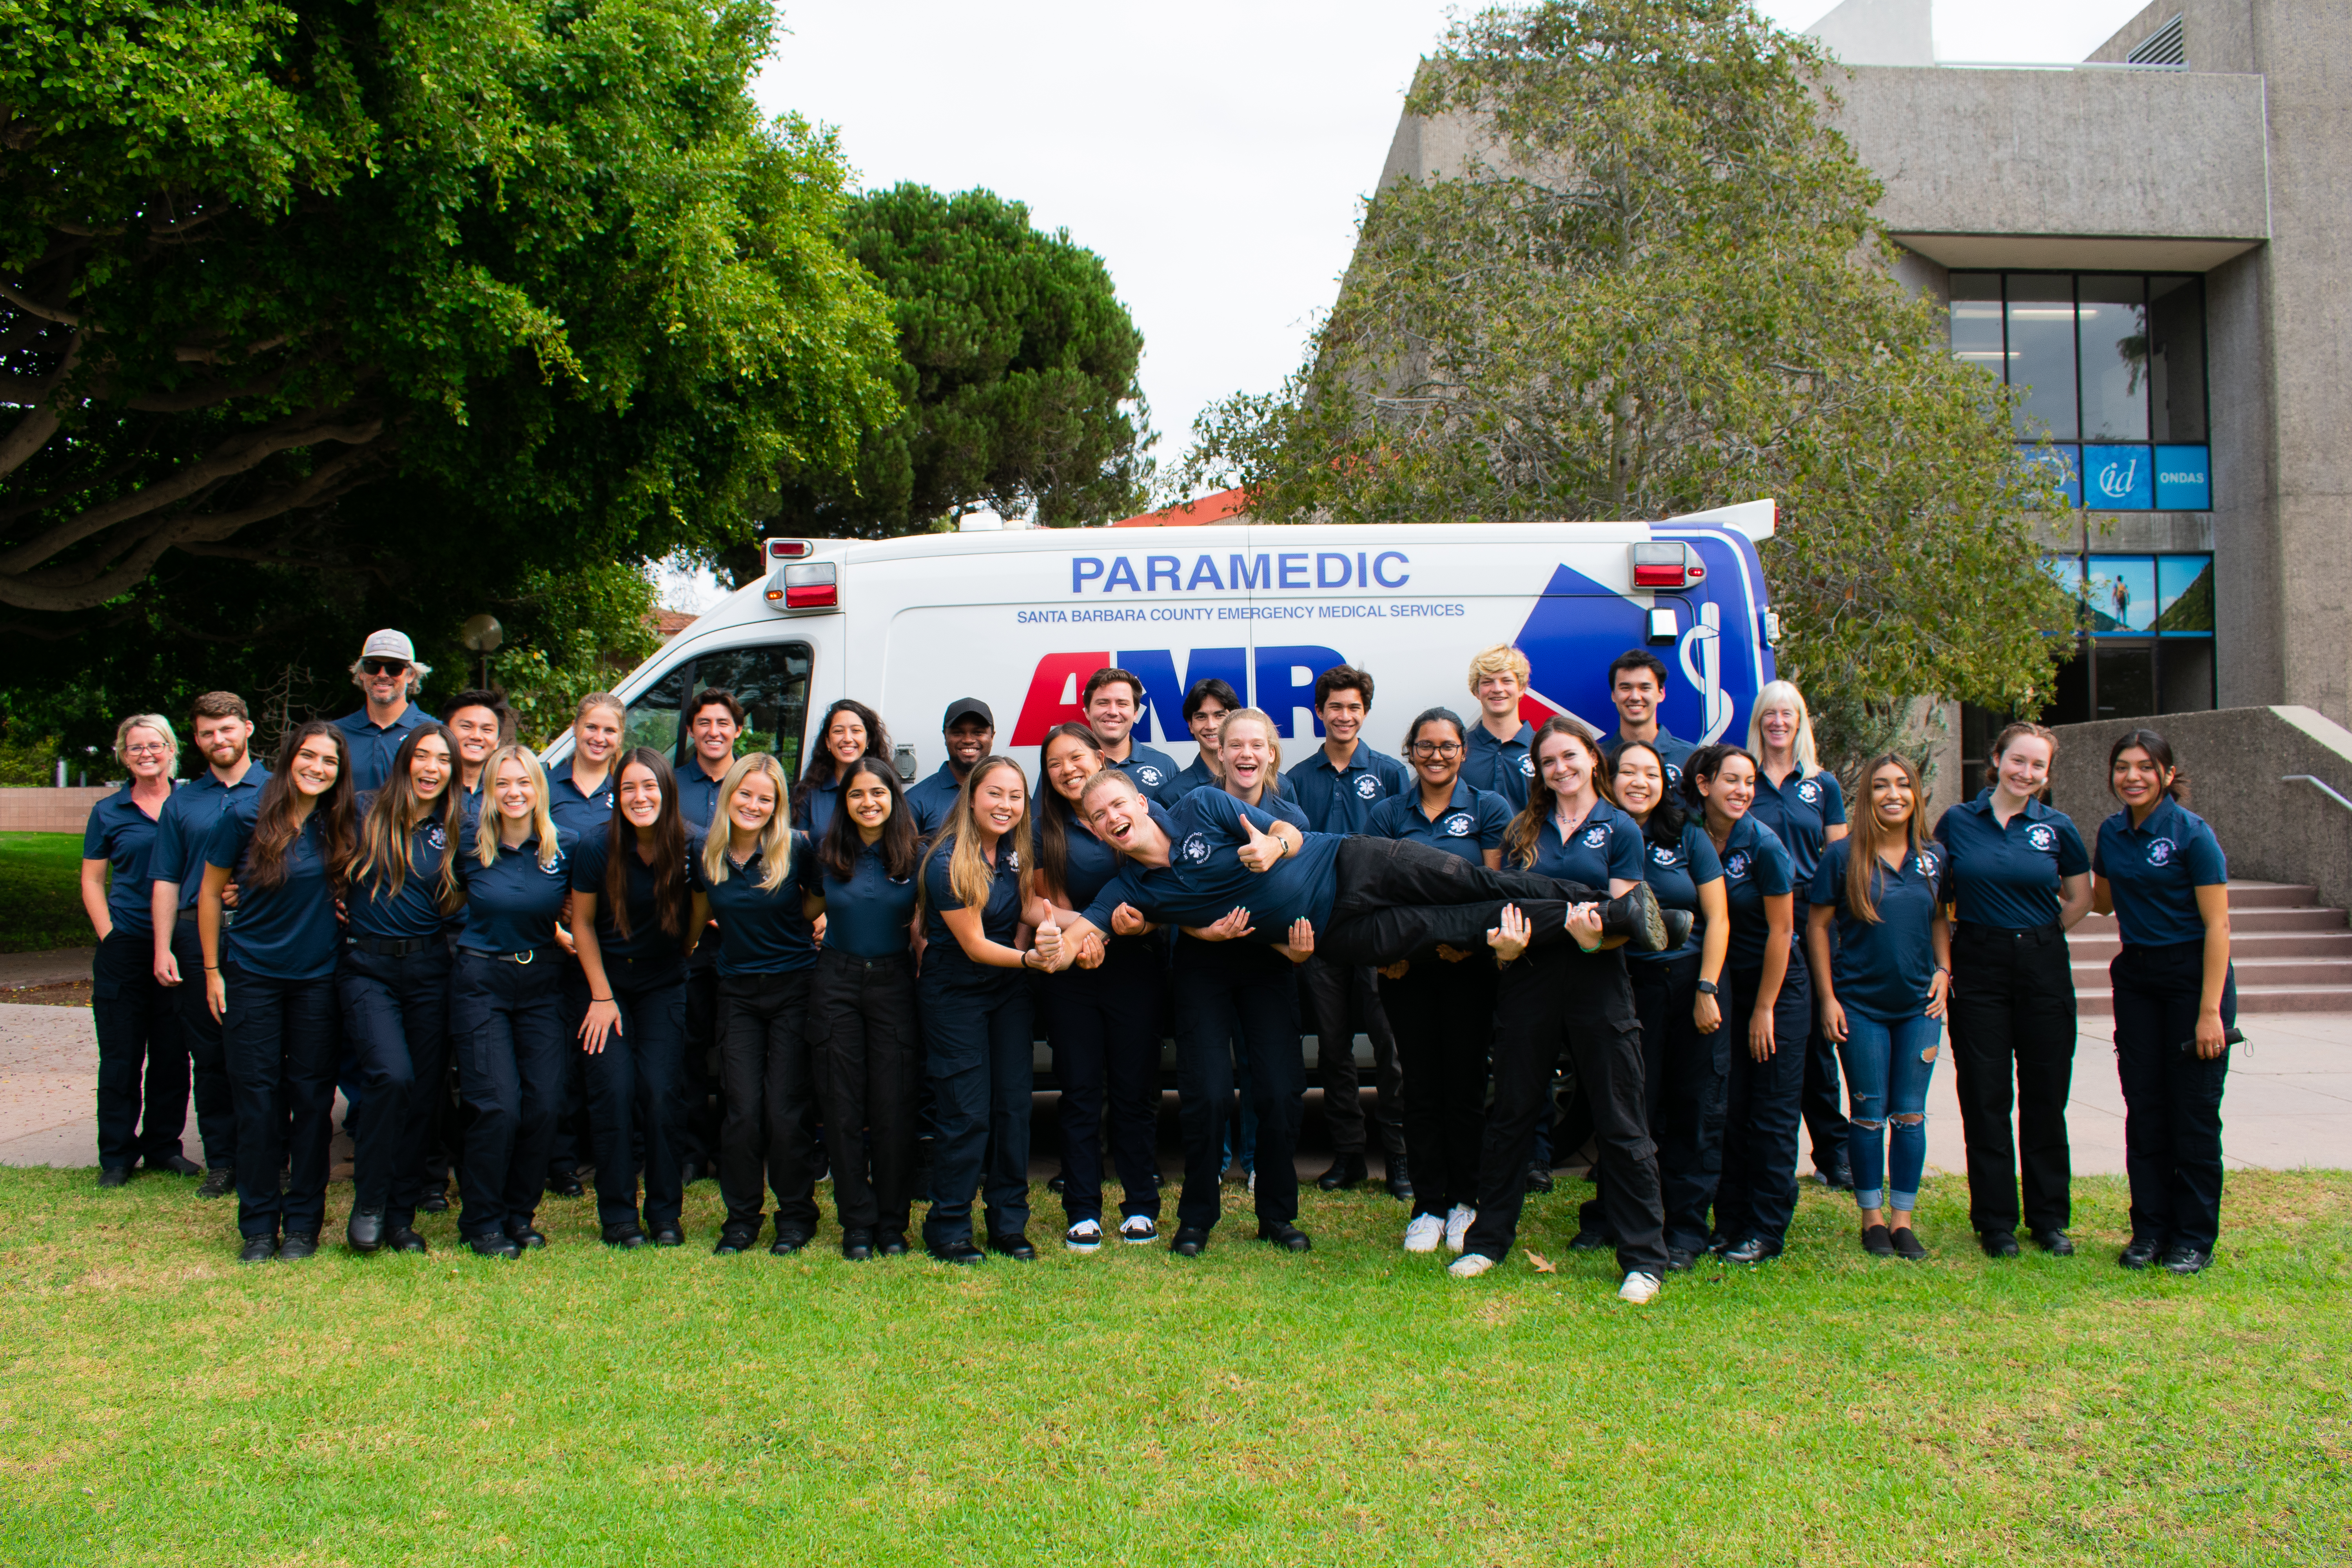 EMT Class standing in their navy blue EMT shirts in front of an AMR ambulance, holding up their lead instructor on their arms